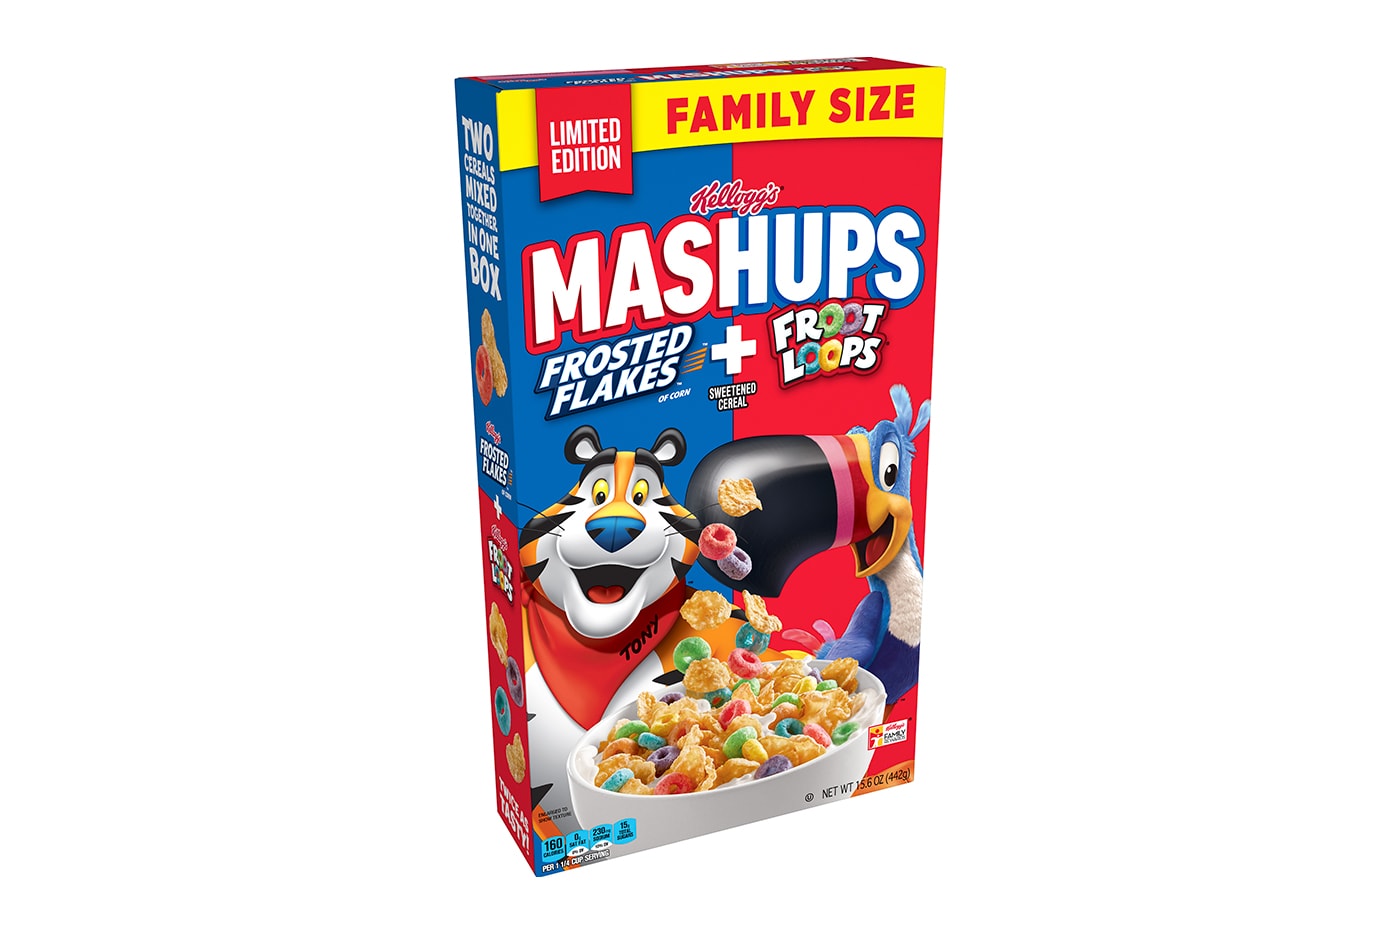 Kellogg's 家樂氏推出全新「Frosted Flakes x Froot Loops」混合穀片組合